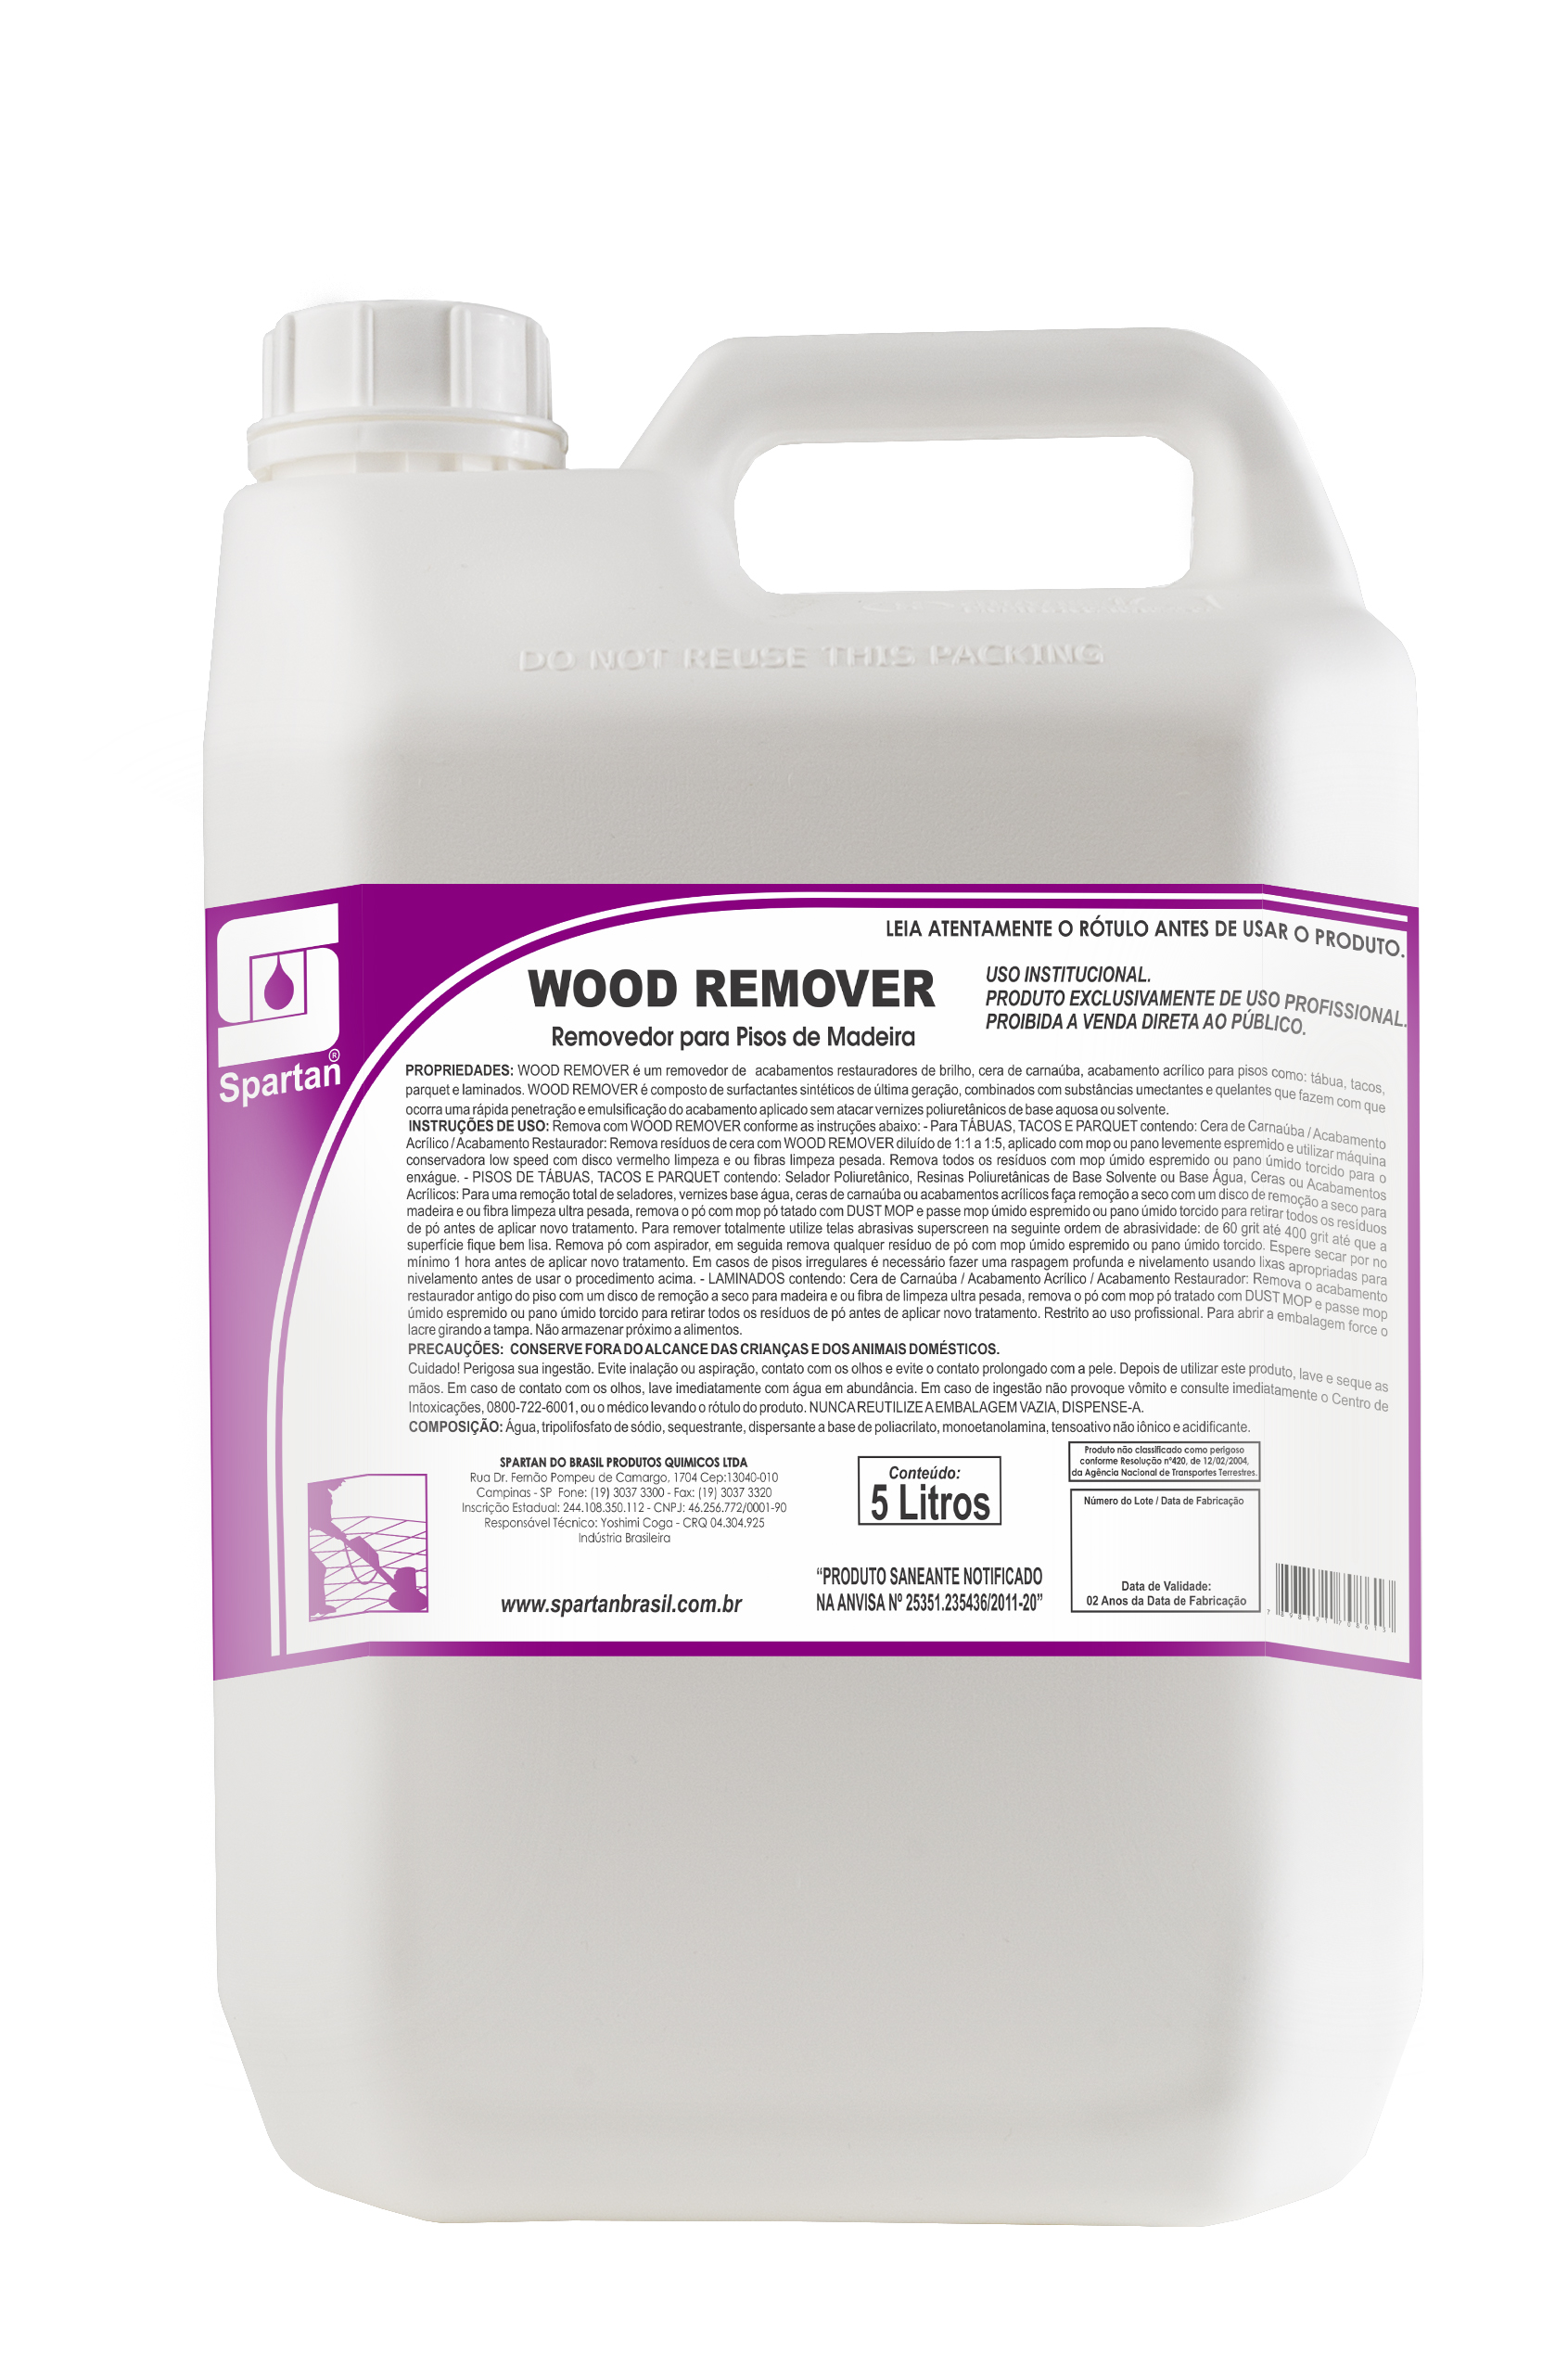 Wood Remover